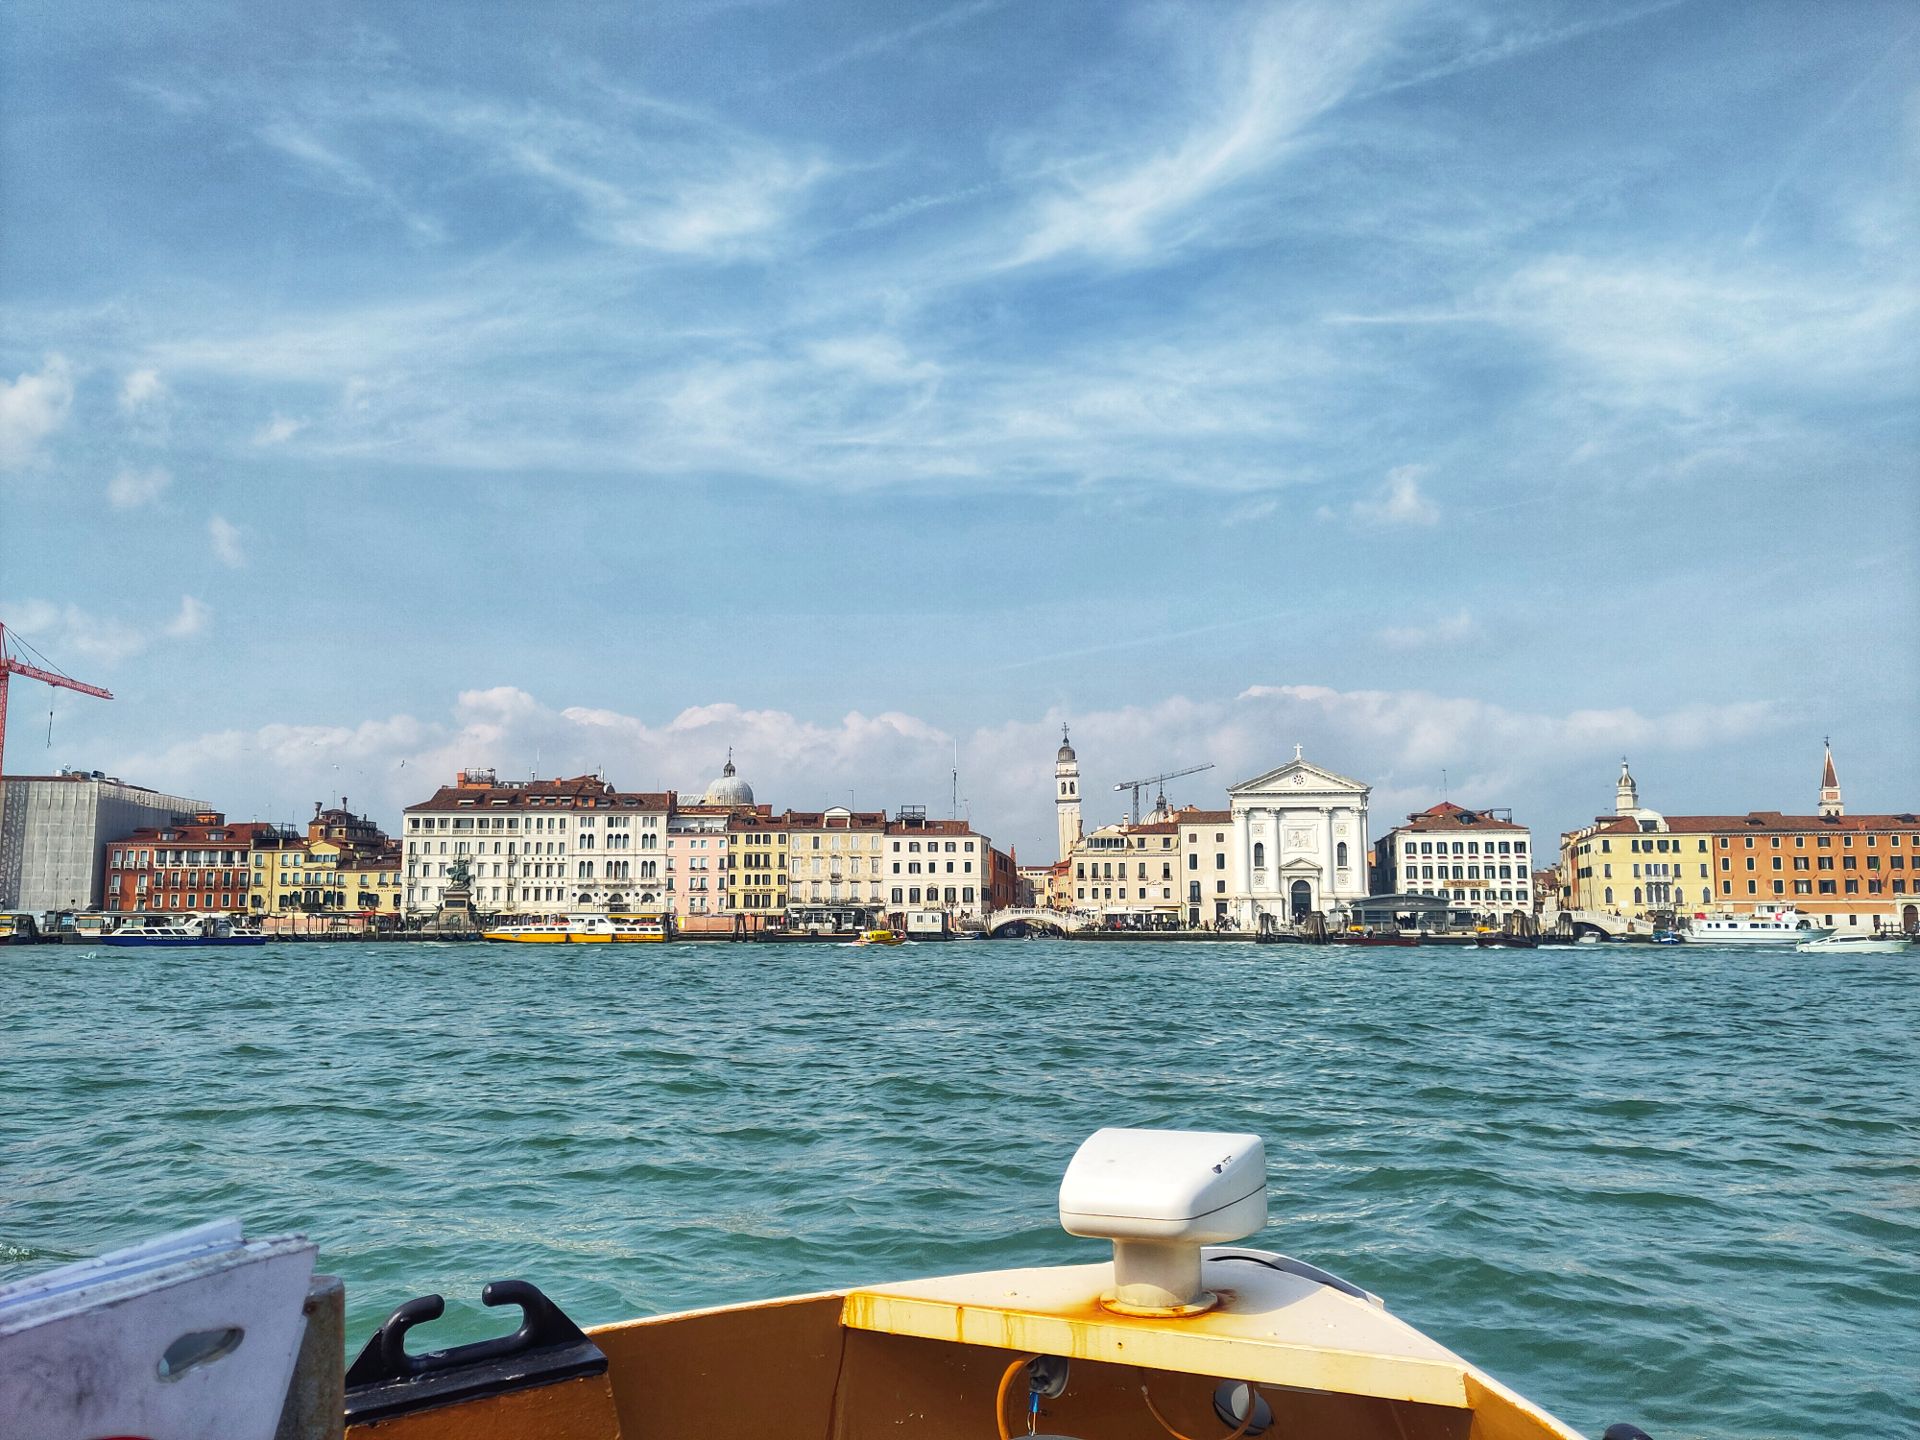 A view of the Venice shore, including yellow and orange buildings and a church belltower. I'm on a boat, so the front of the boat is visible right in front of me.